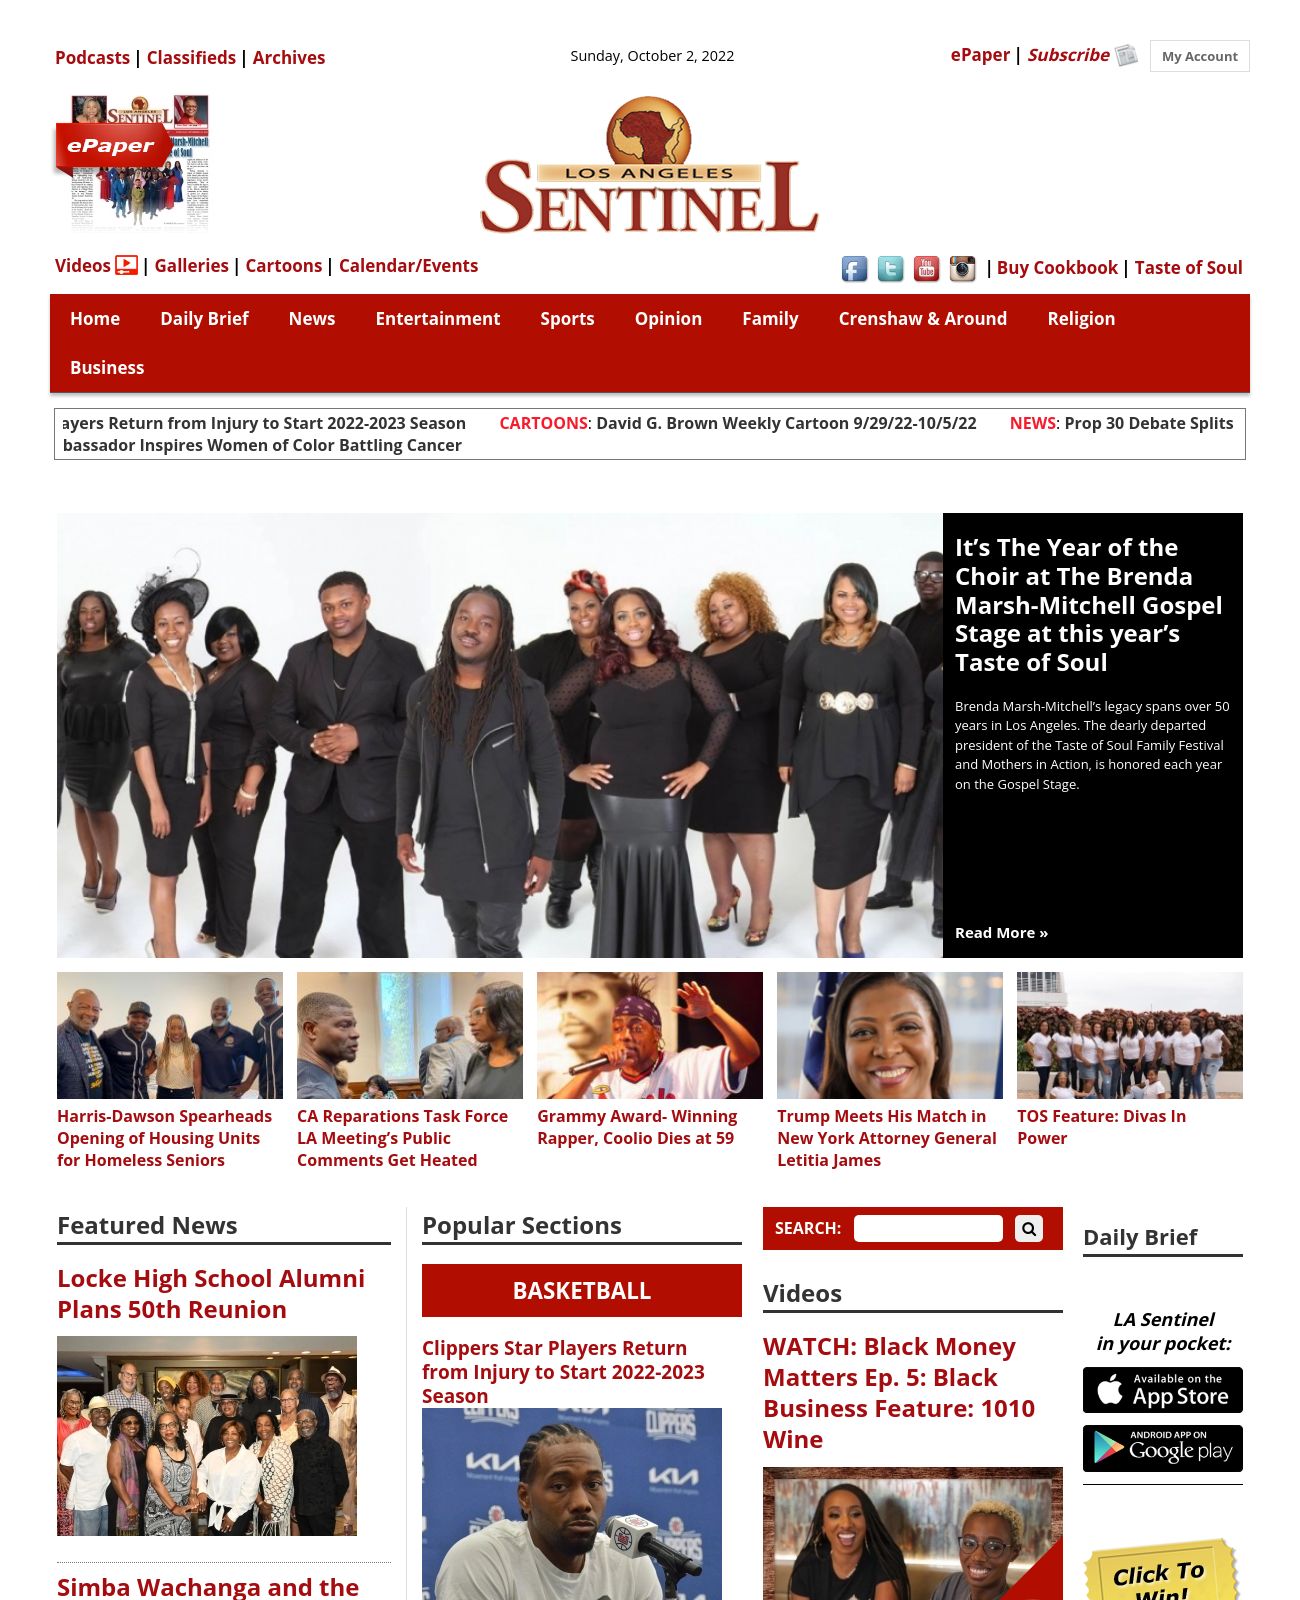 Los Angeles Sentinel at 2022-10-03 00:30:35-07:00 local time